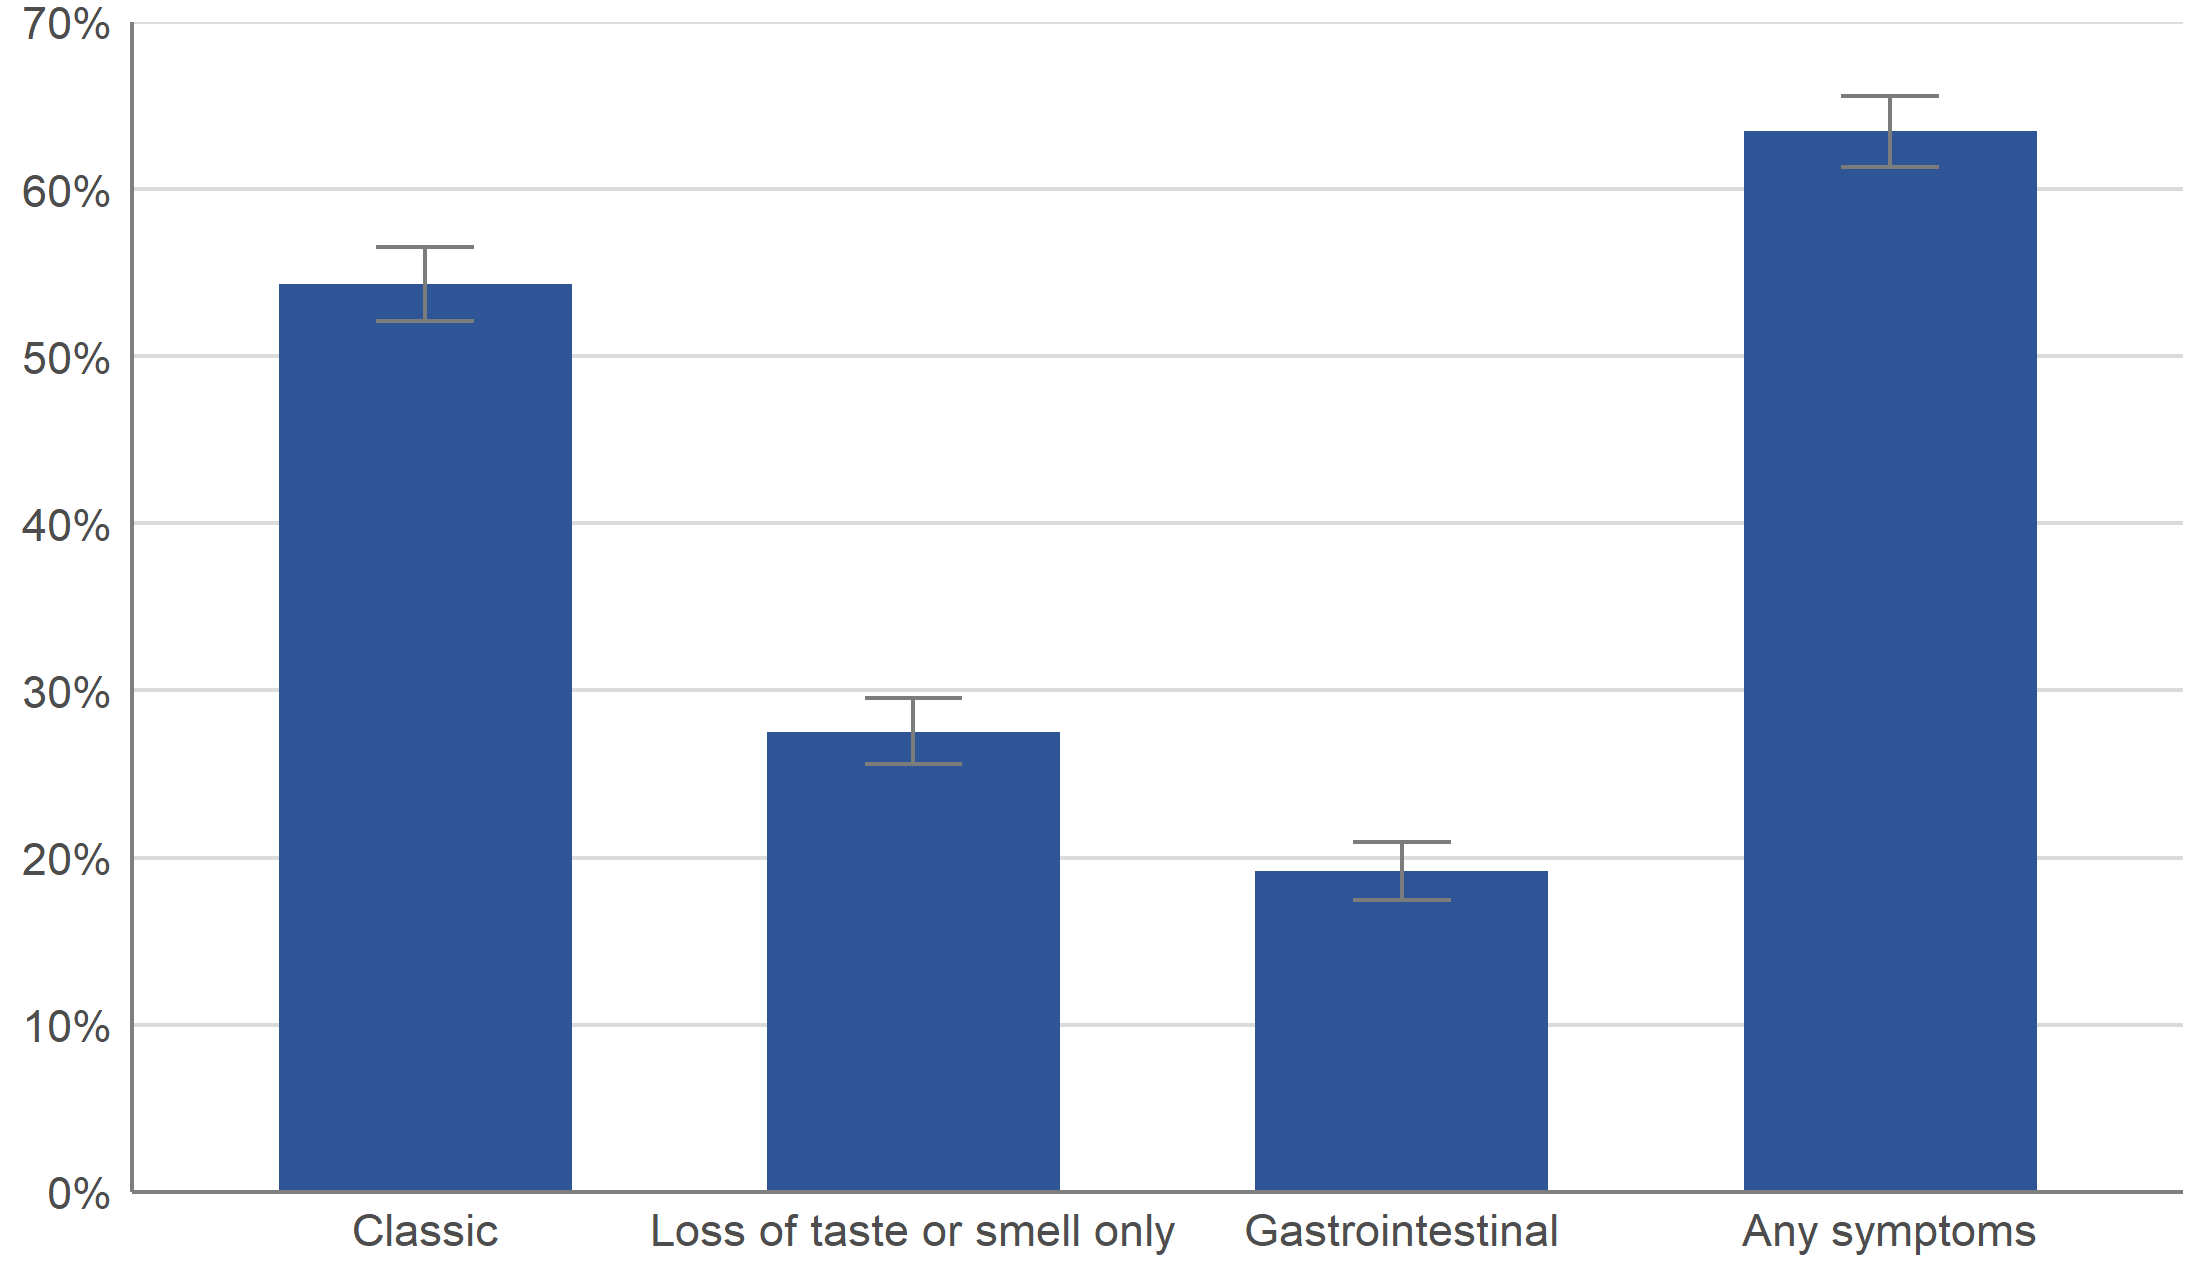 The percentage of people who reported classic COVID-19 symptoms was far greater than those reporting loss of taste or smell only, or gastrointestinal symptoms.